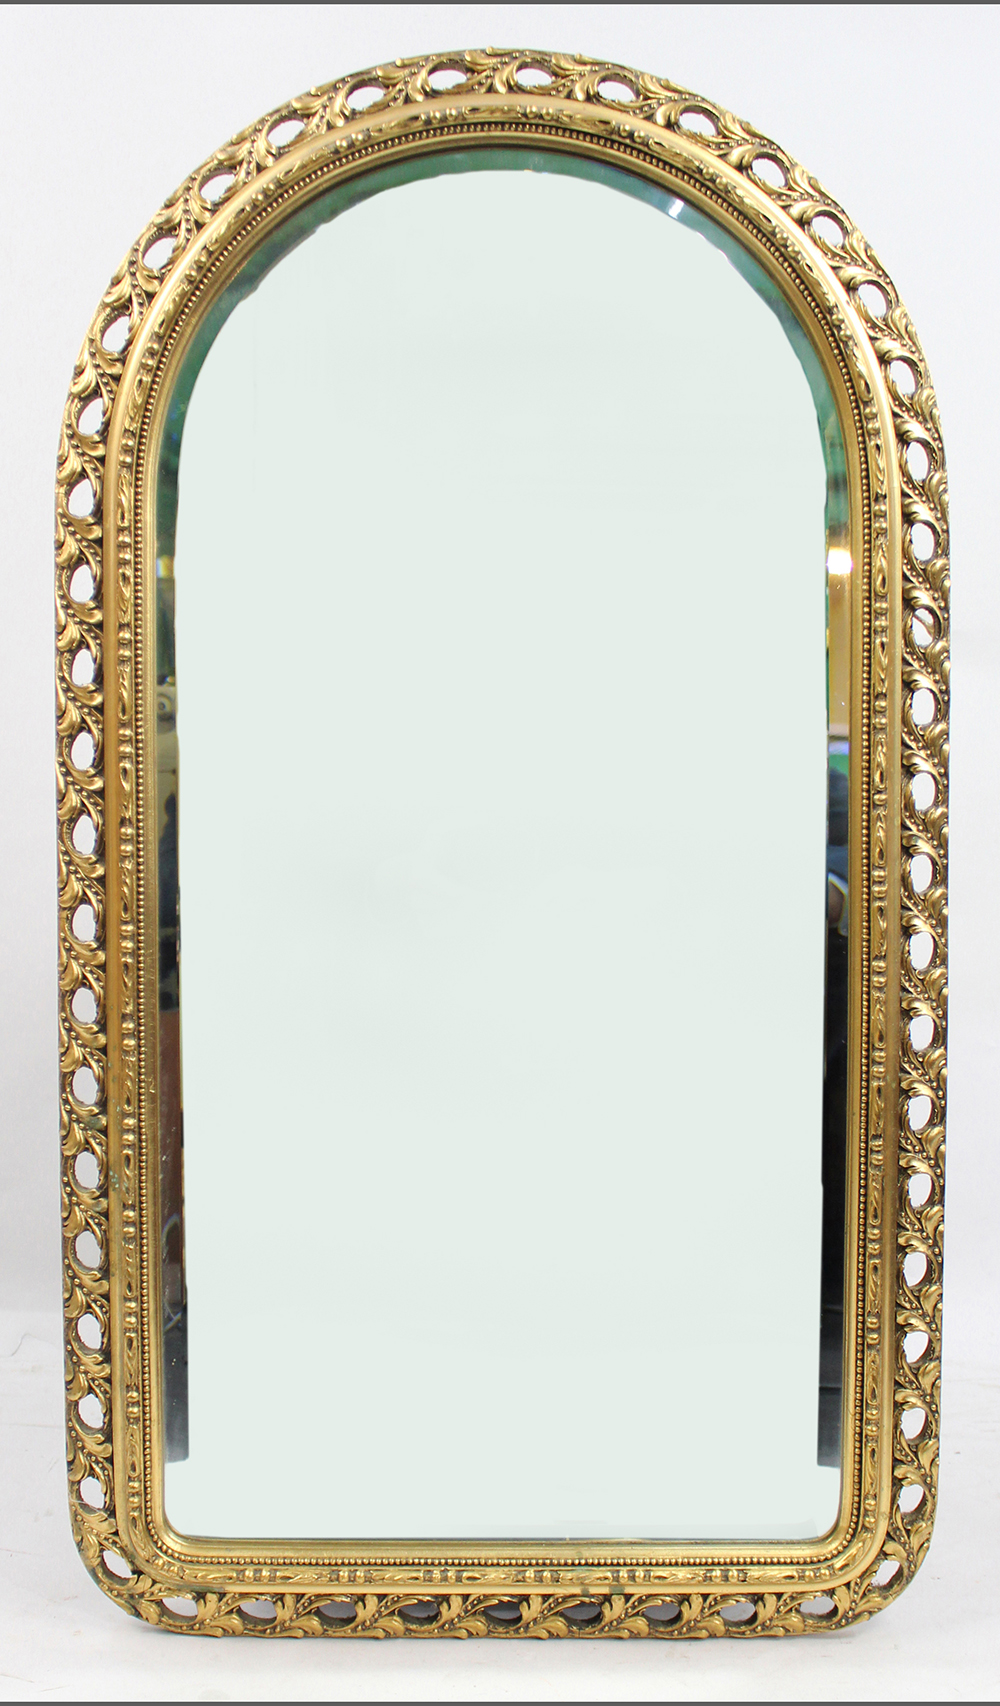 Pair of Arched Giltwood Mirrors - Image 2 of 4